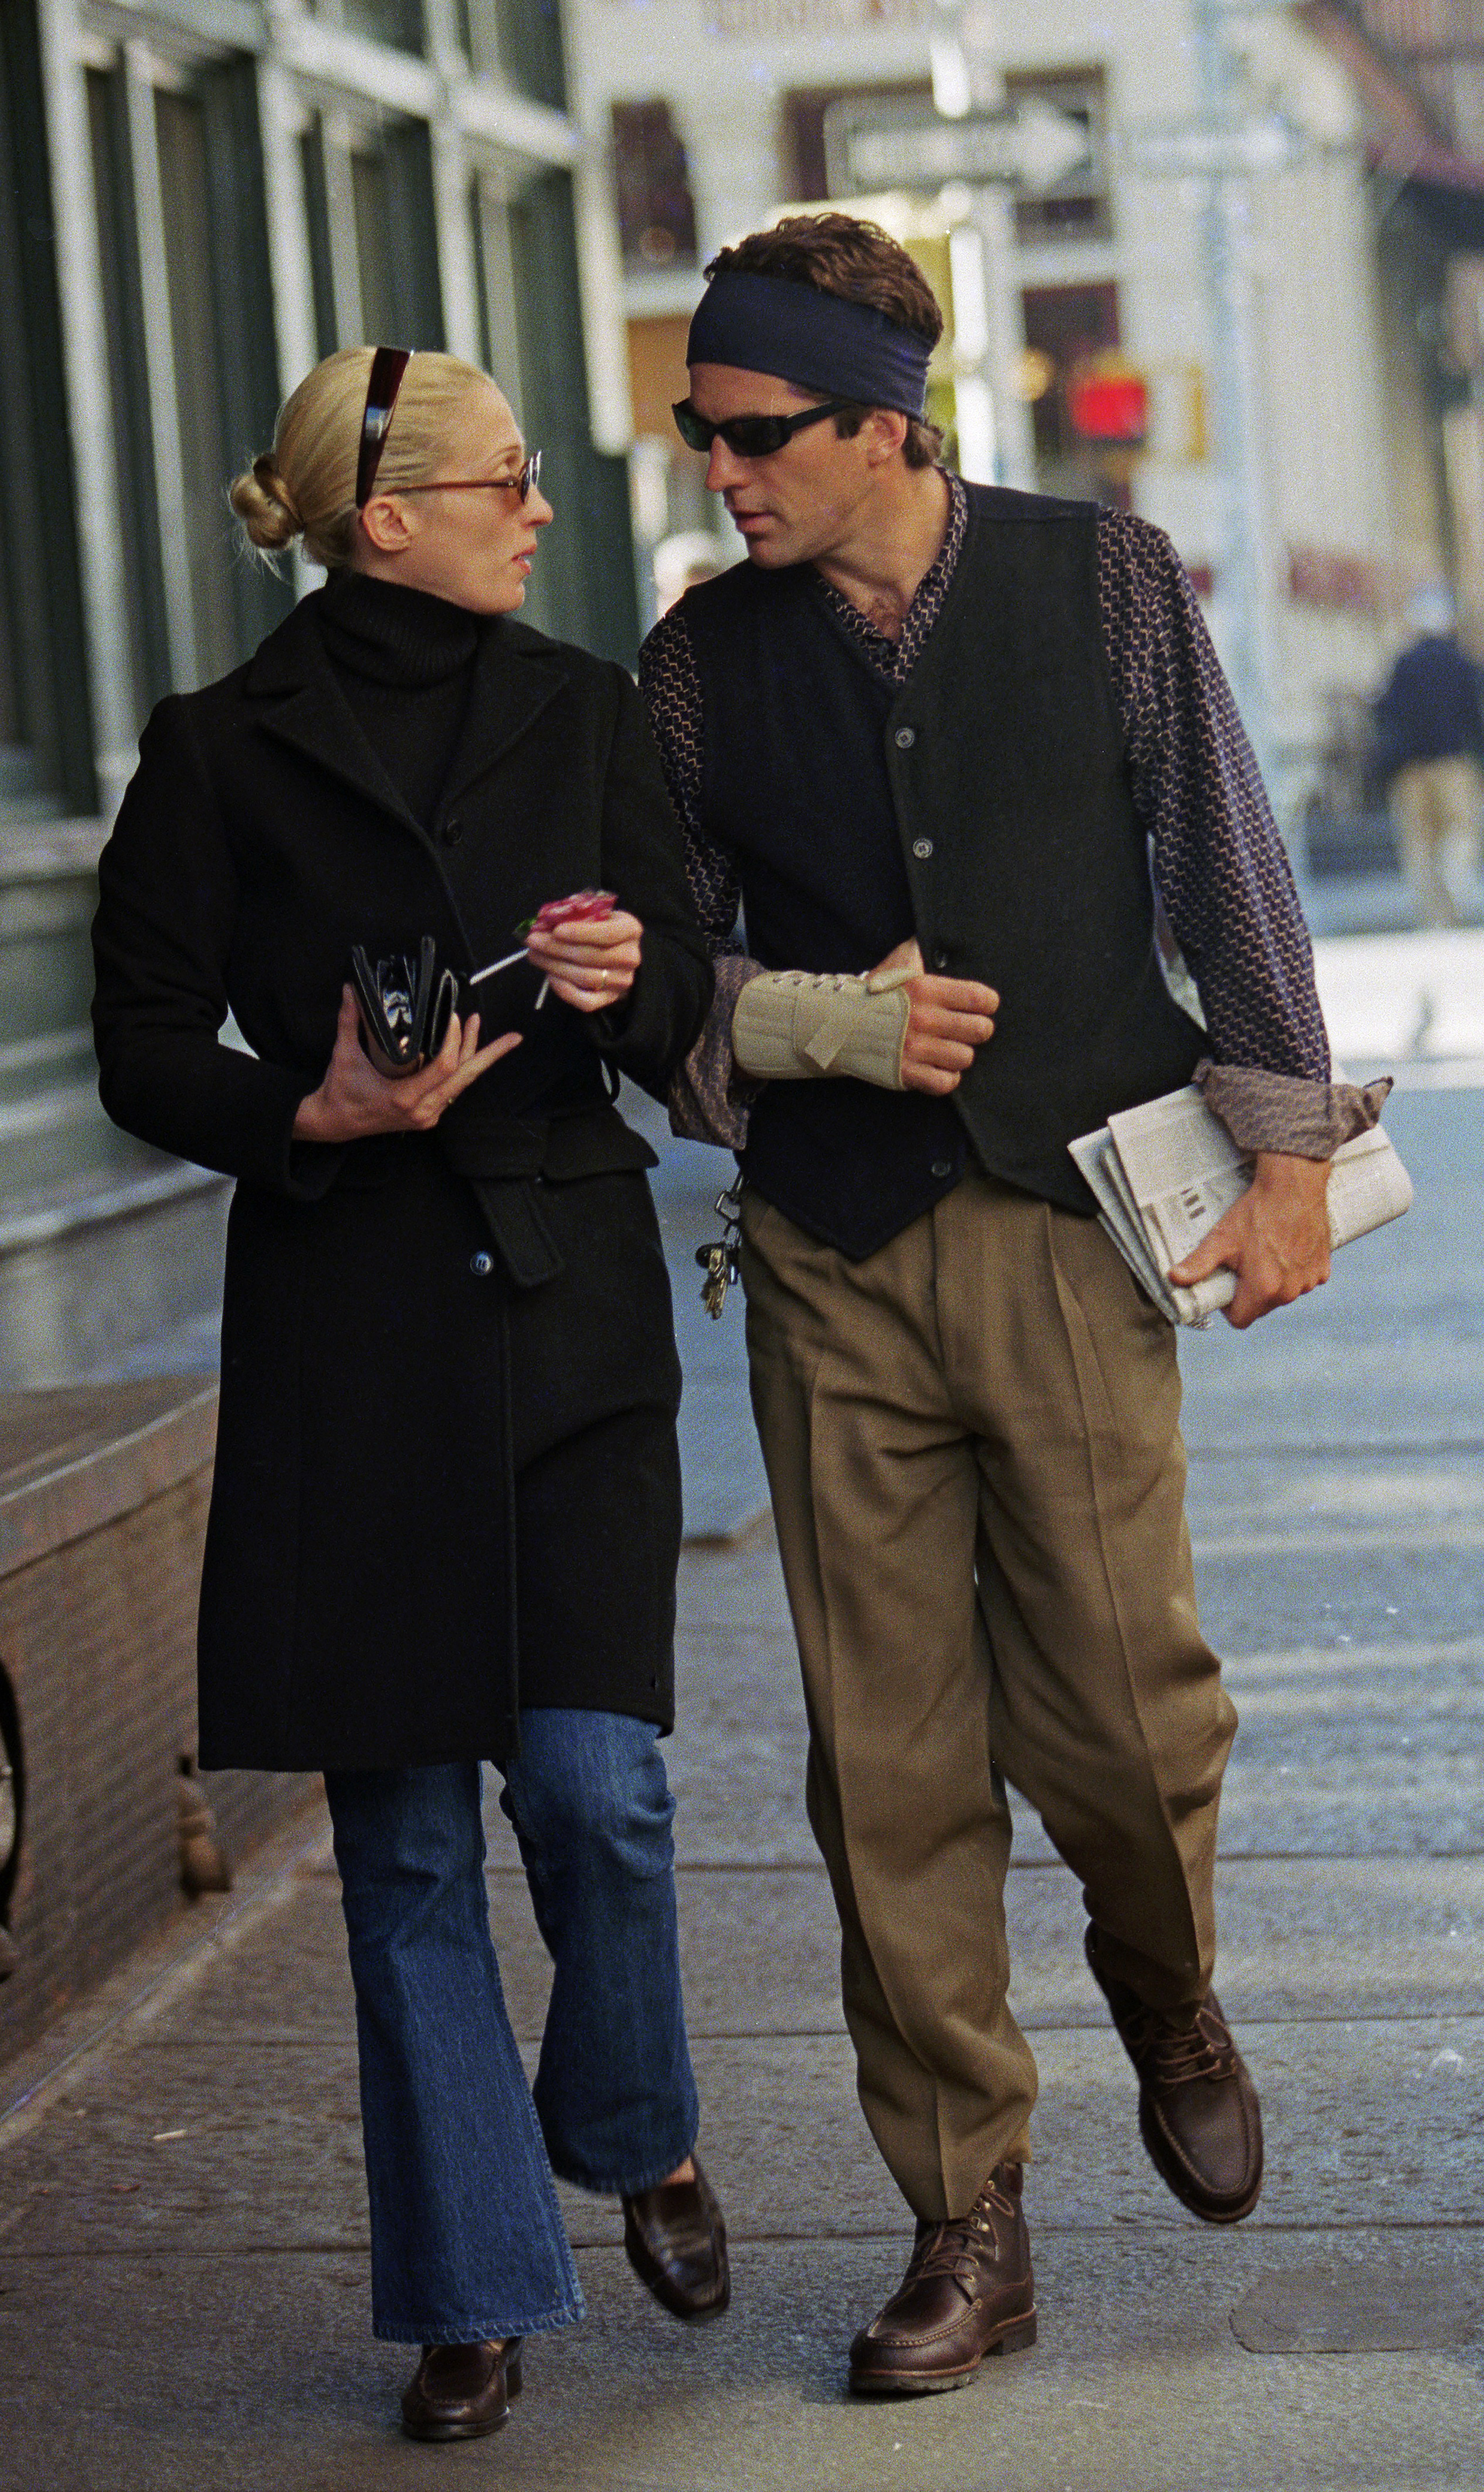 John Kennedy Jr., with his injured hand wrapped in a bandage, strolling in Tribeca with his wife, Carolyn Bessette Kennedy, after brunch at Bubby's on October 18, 1997 | Source: Getty Images